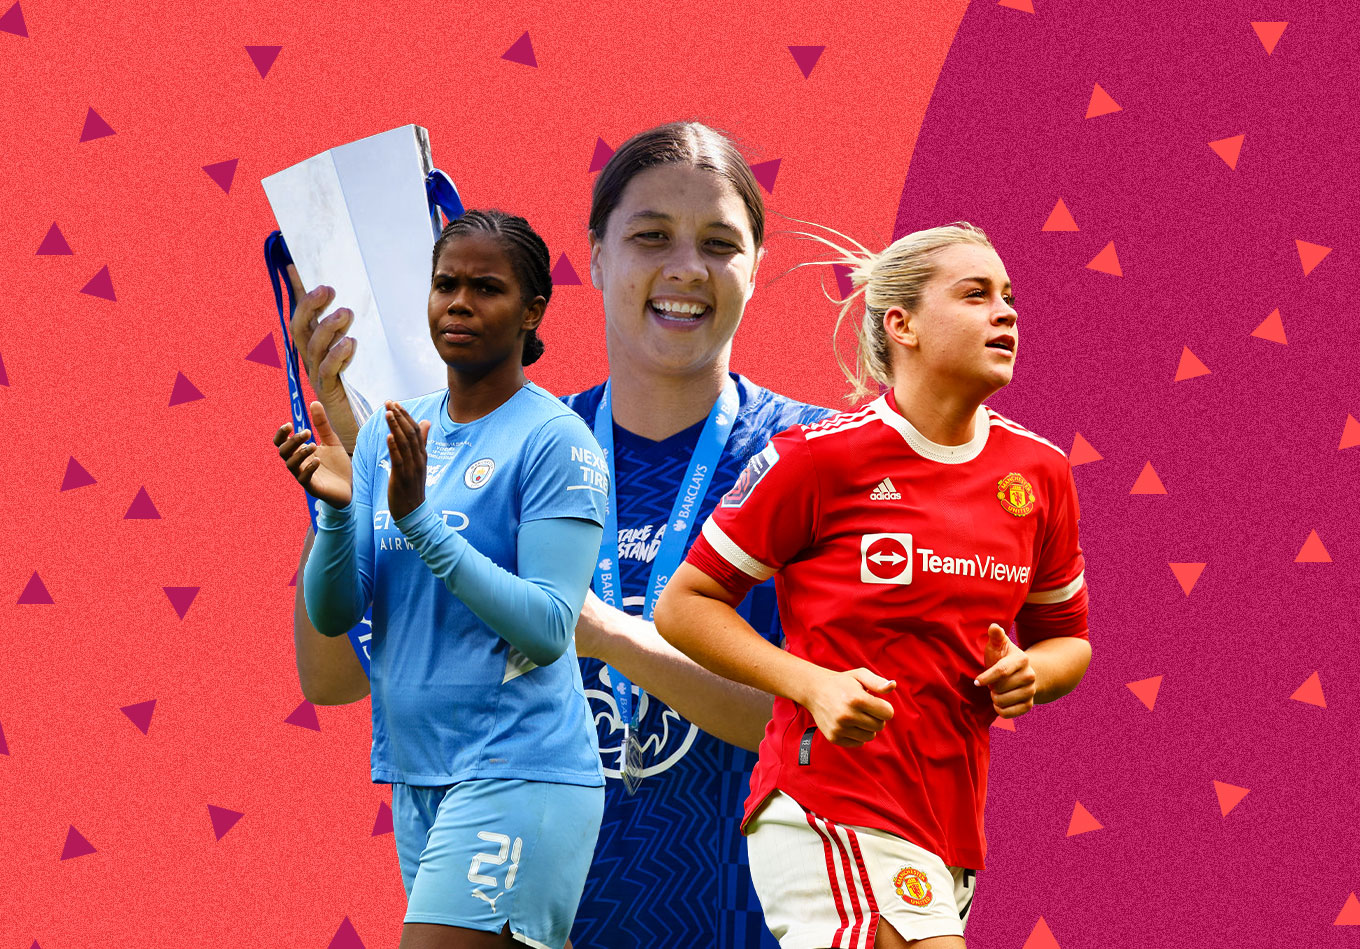 Five Burning Questions That Need Answering Ahead of the WSL’s Return